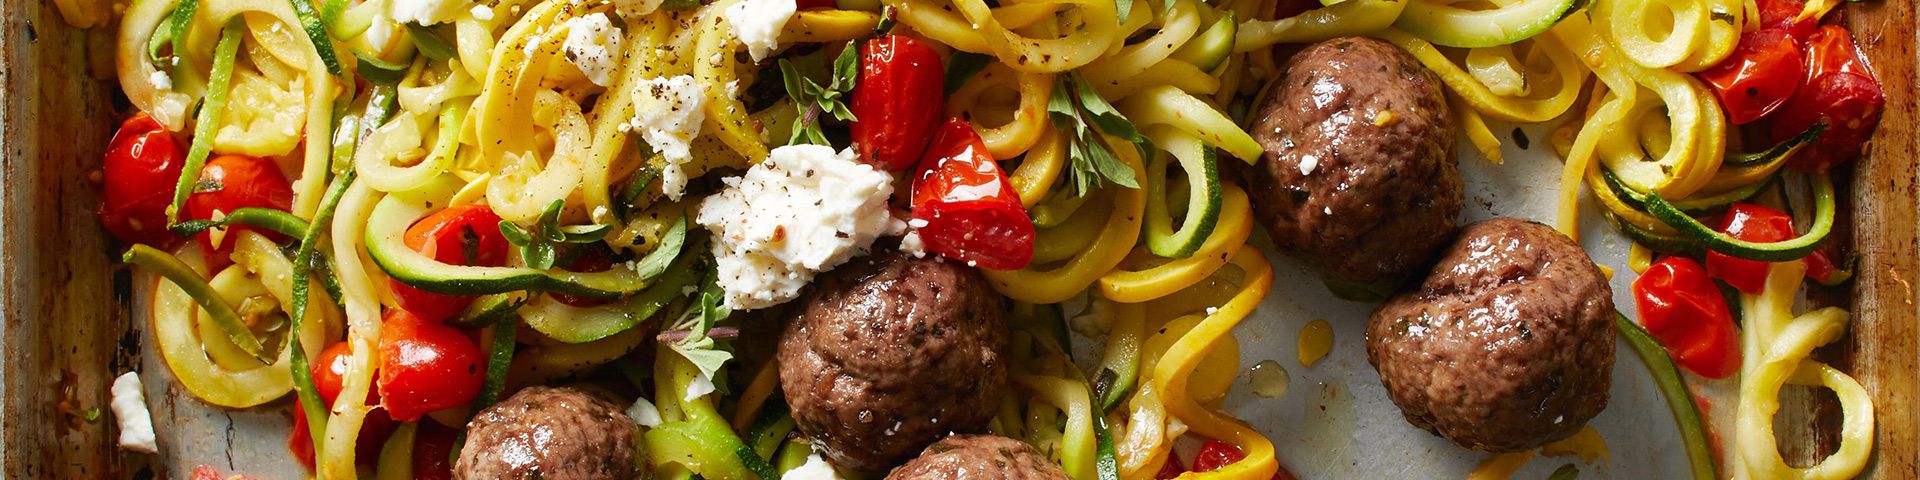 Greek Meatballs with Squash "Noodles" and Tomatoes